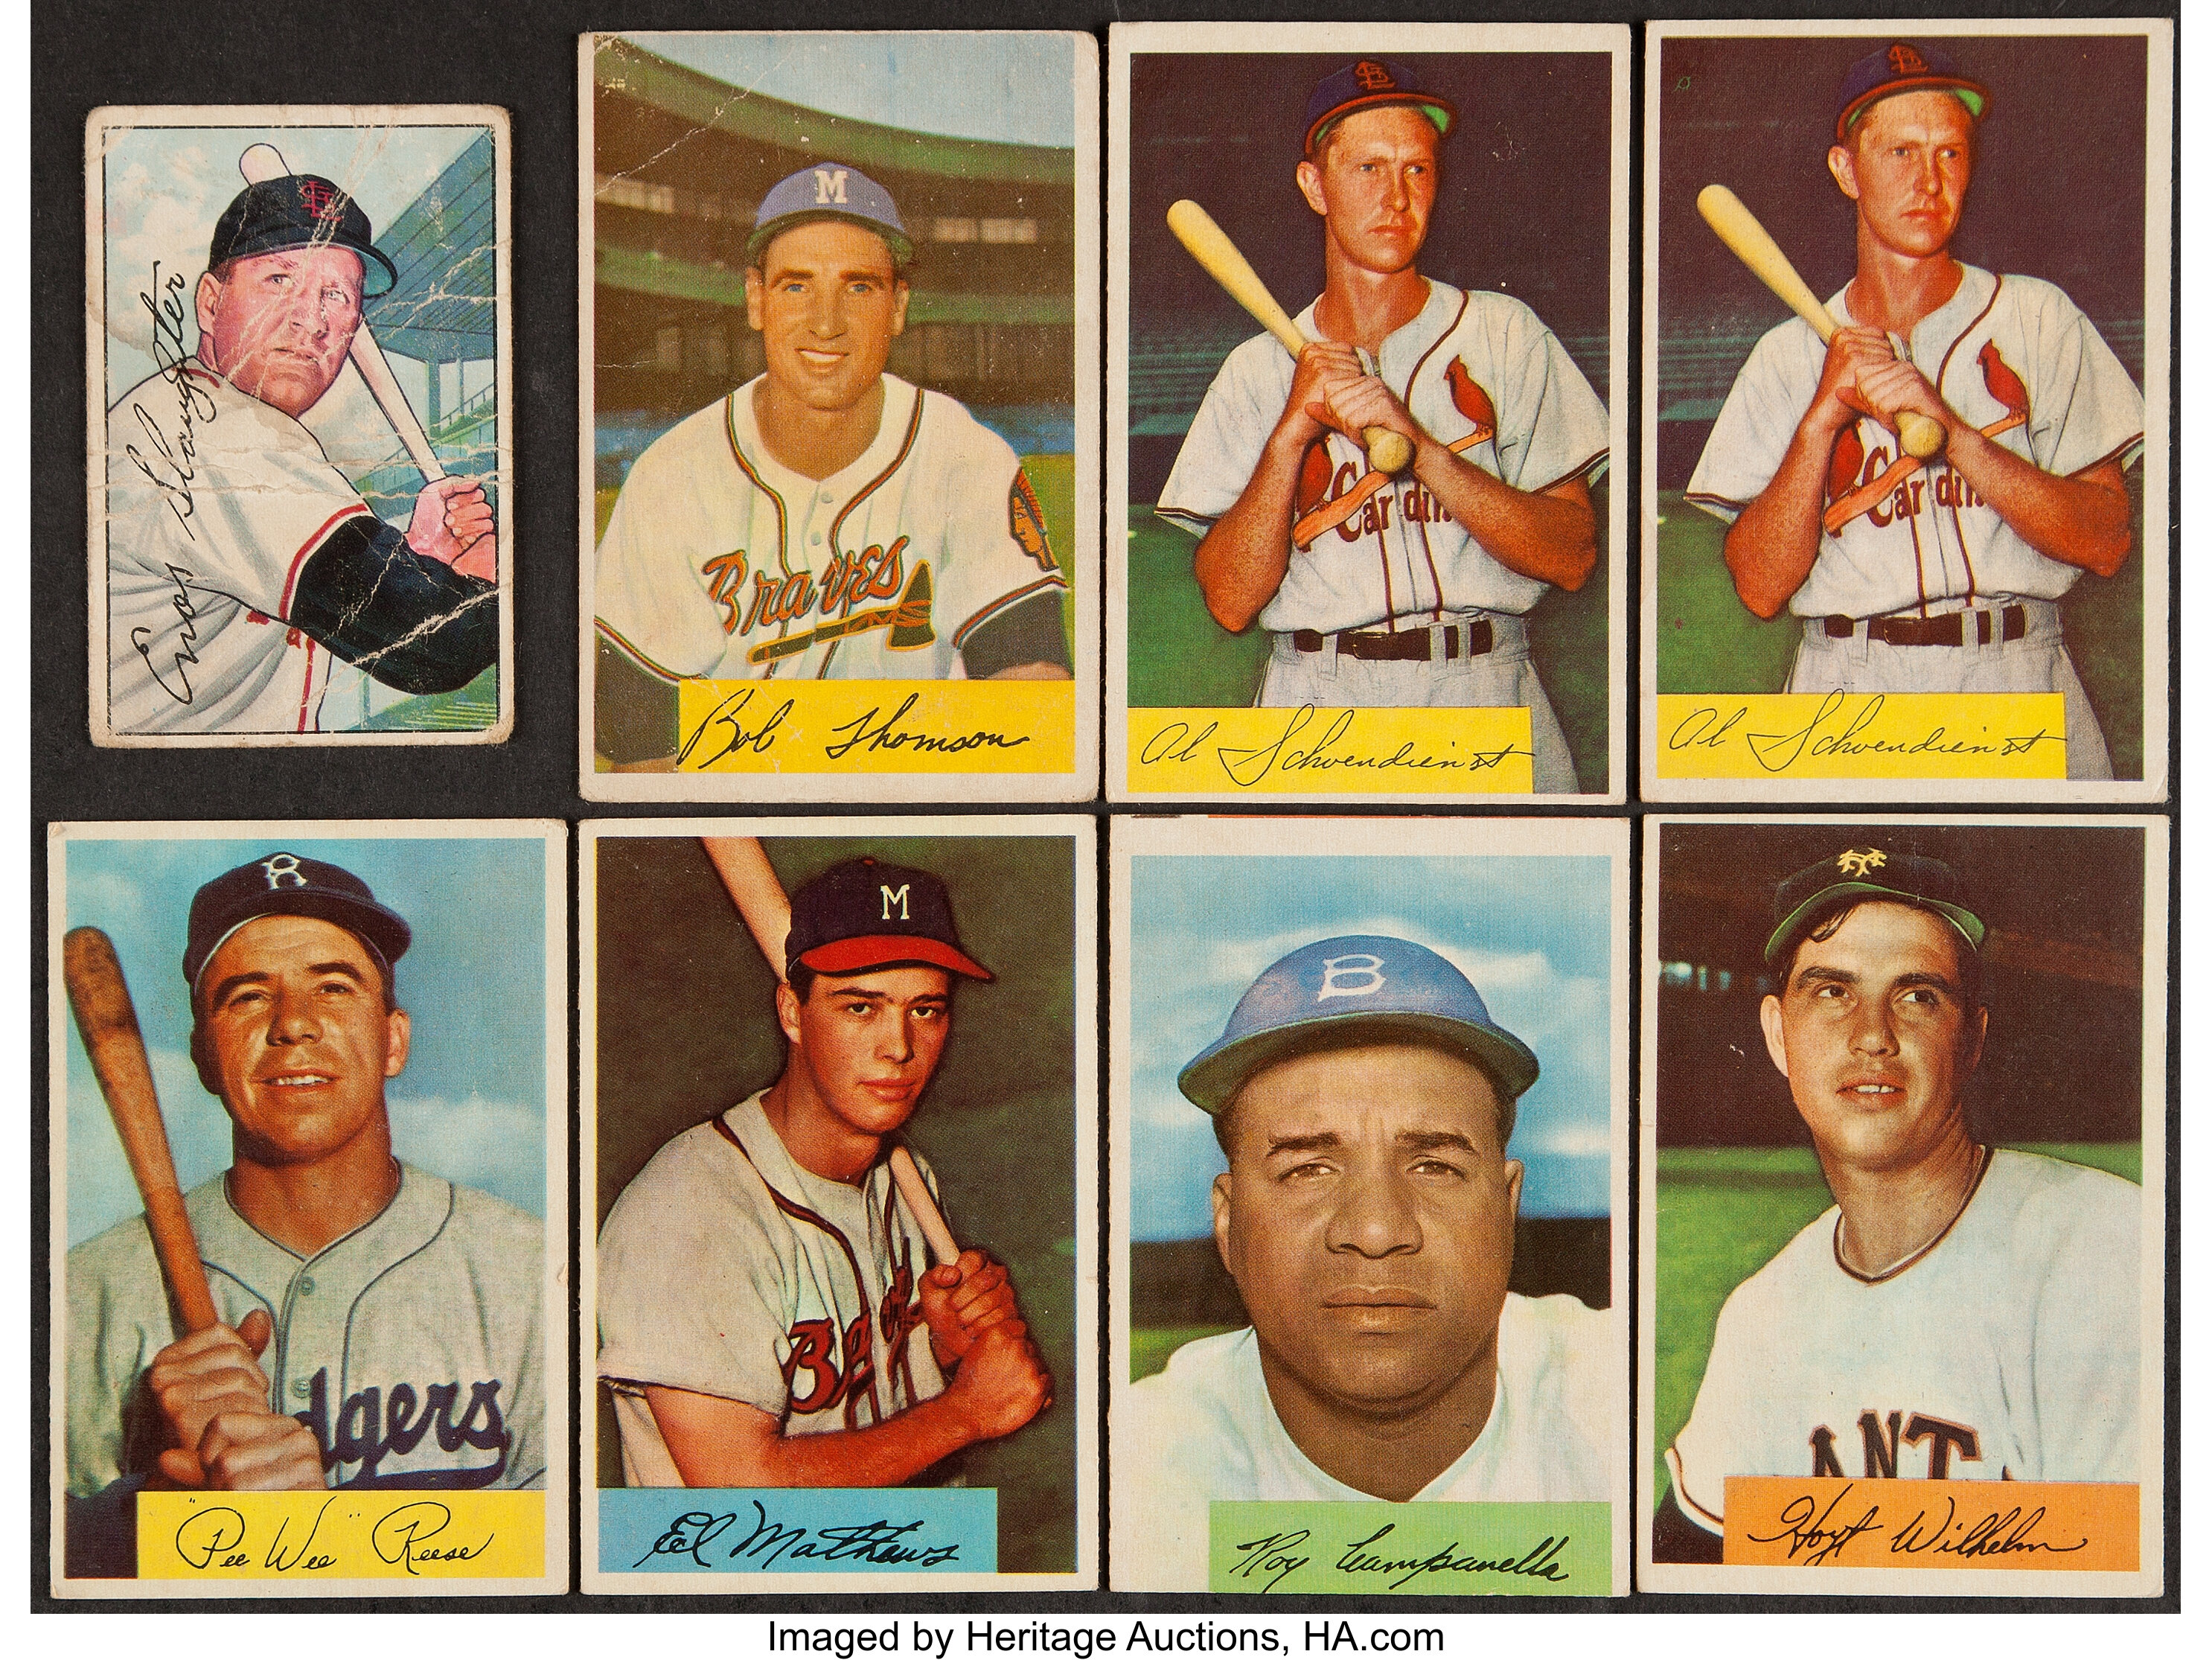 1951 54 Bowman Baseball Collection 79 Plus 19 Non Sports Cards Lotid 40001 Heritage Auctions